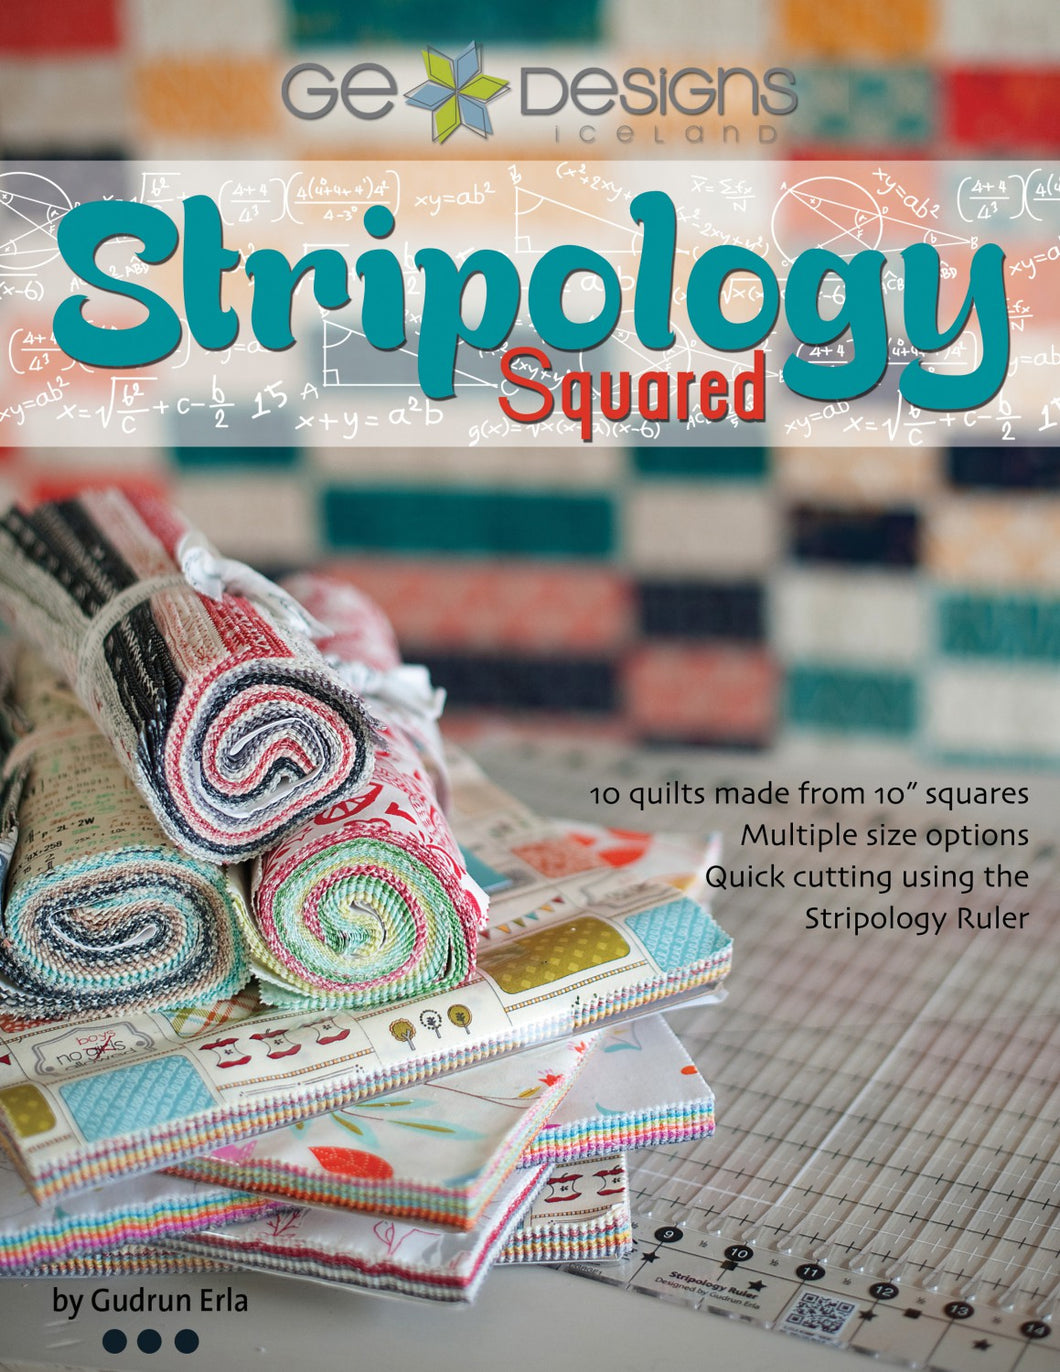 Stripology Squared by Gudrun Erla from G. E. Designs